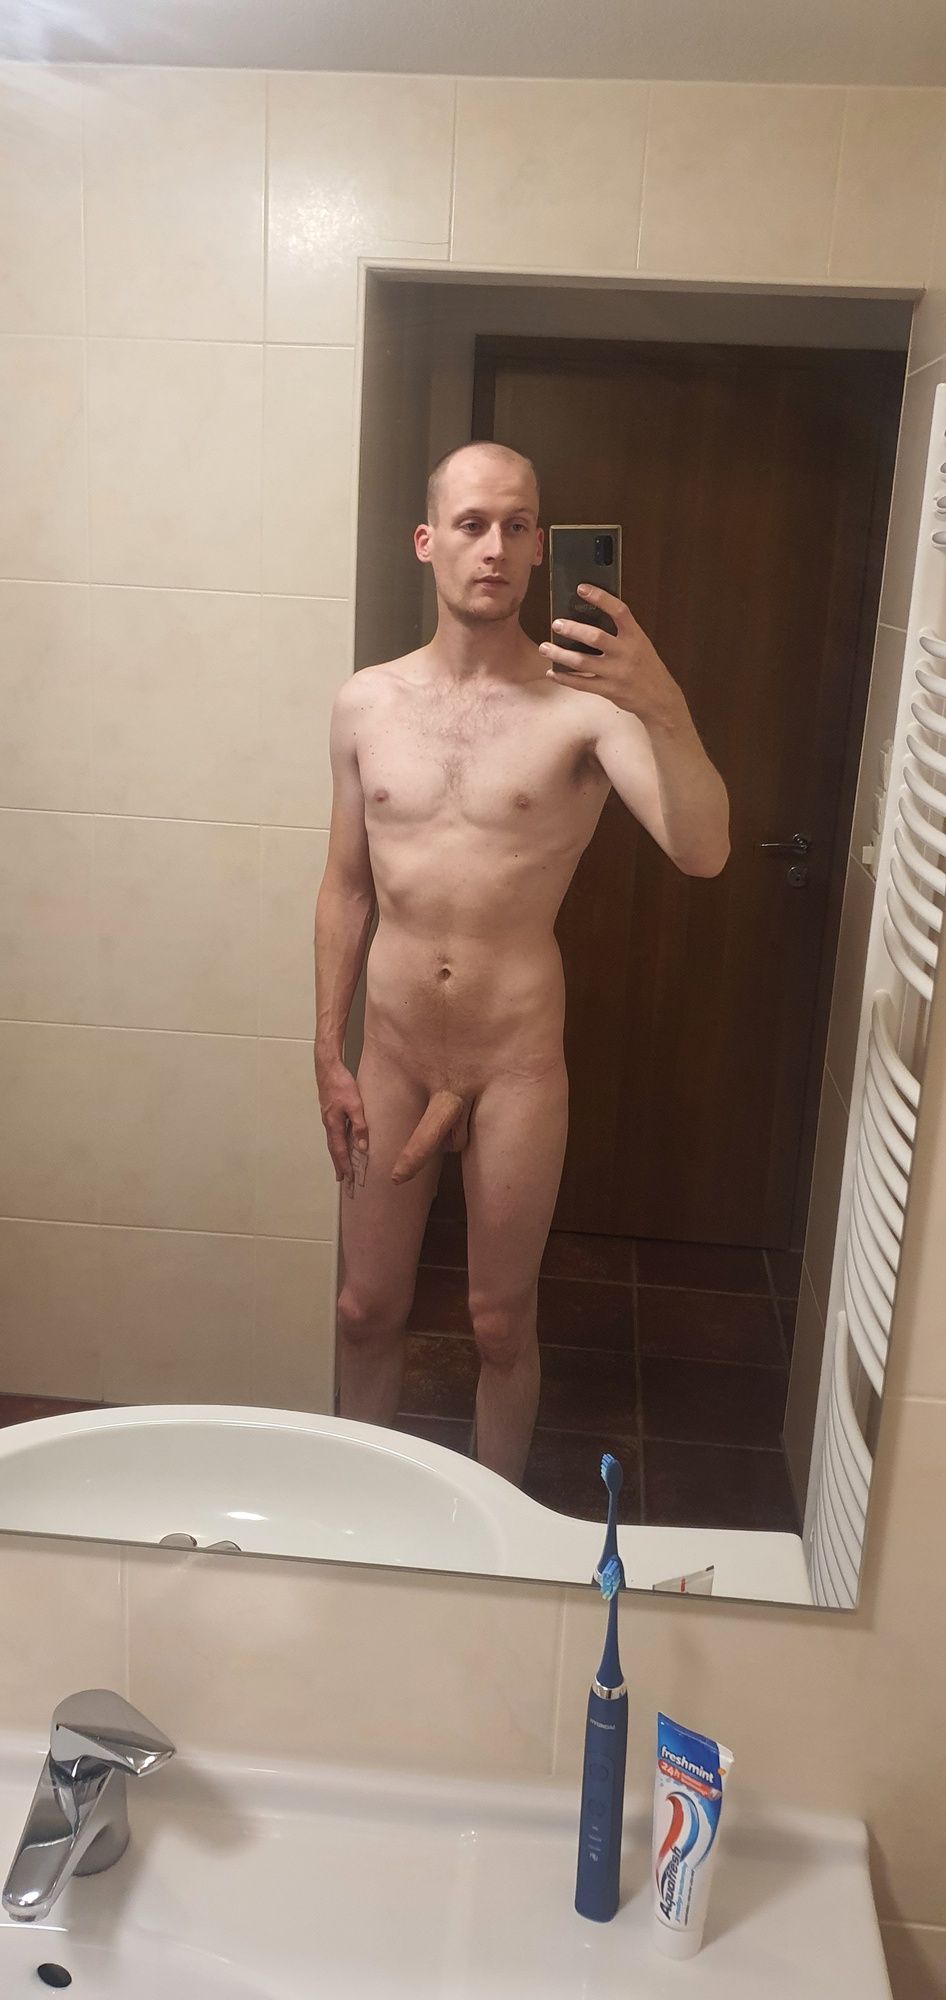 Skinny guy showing off #2